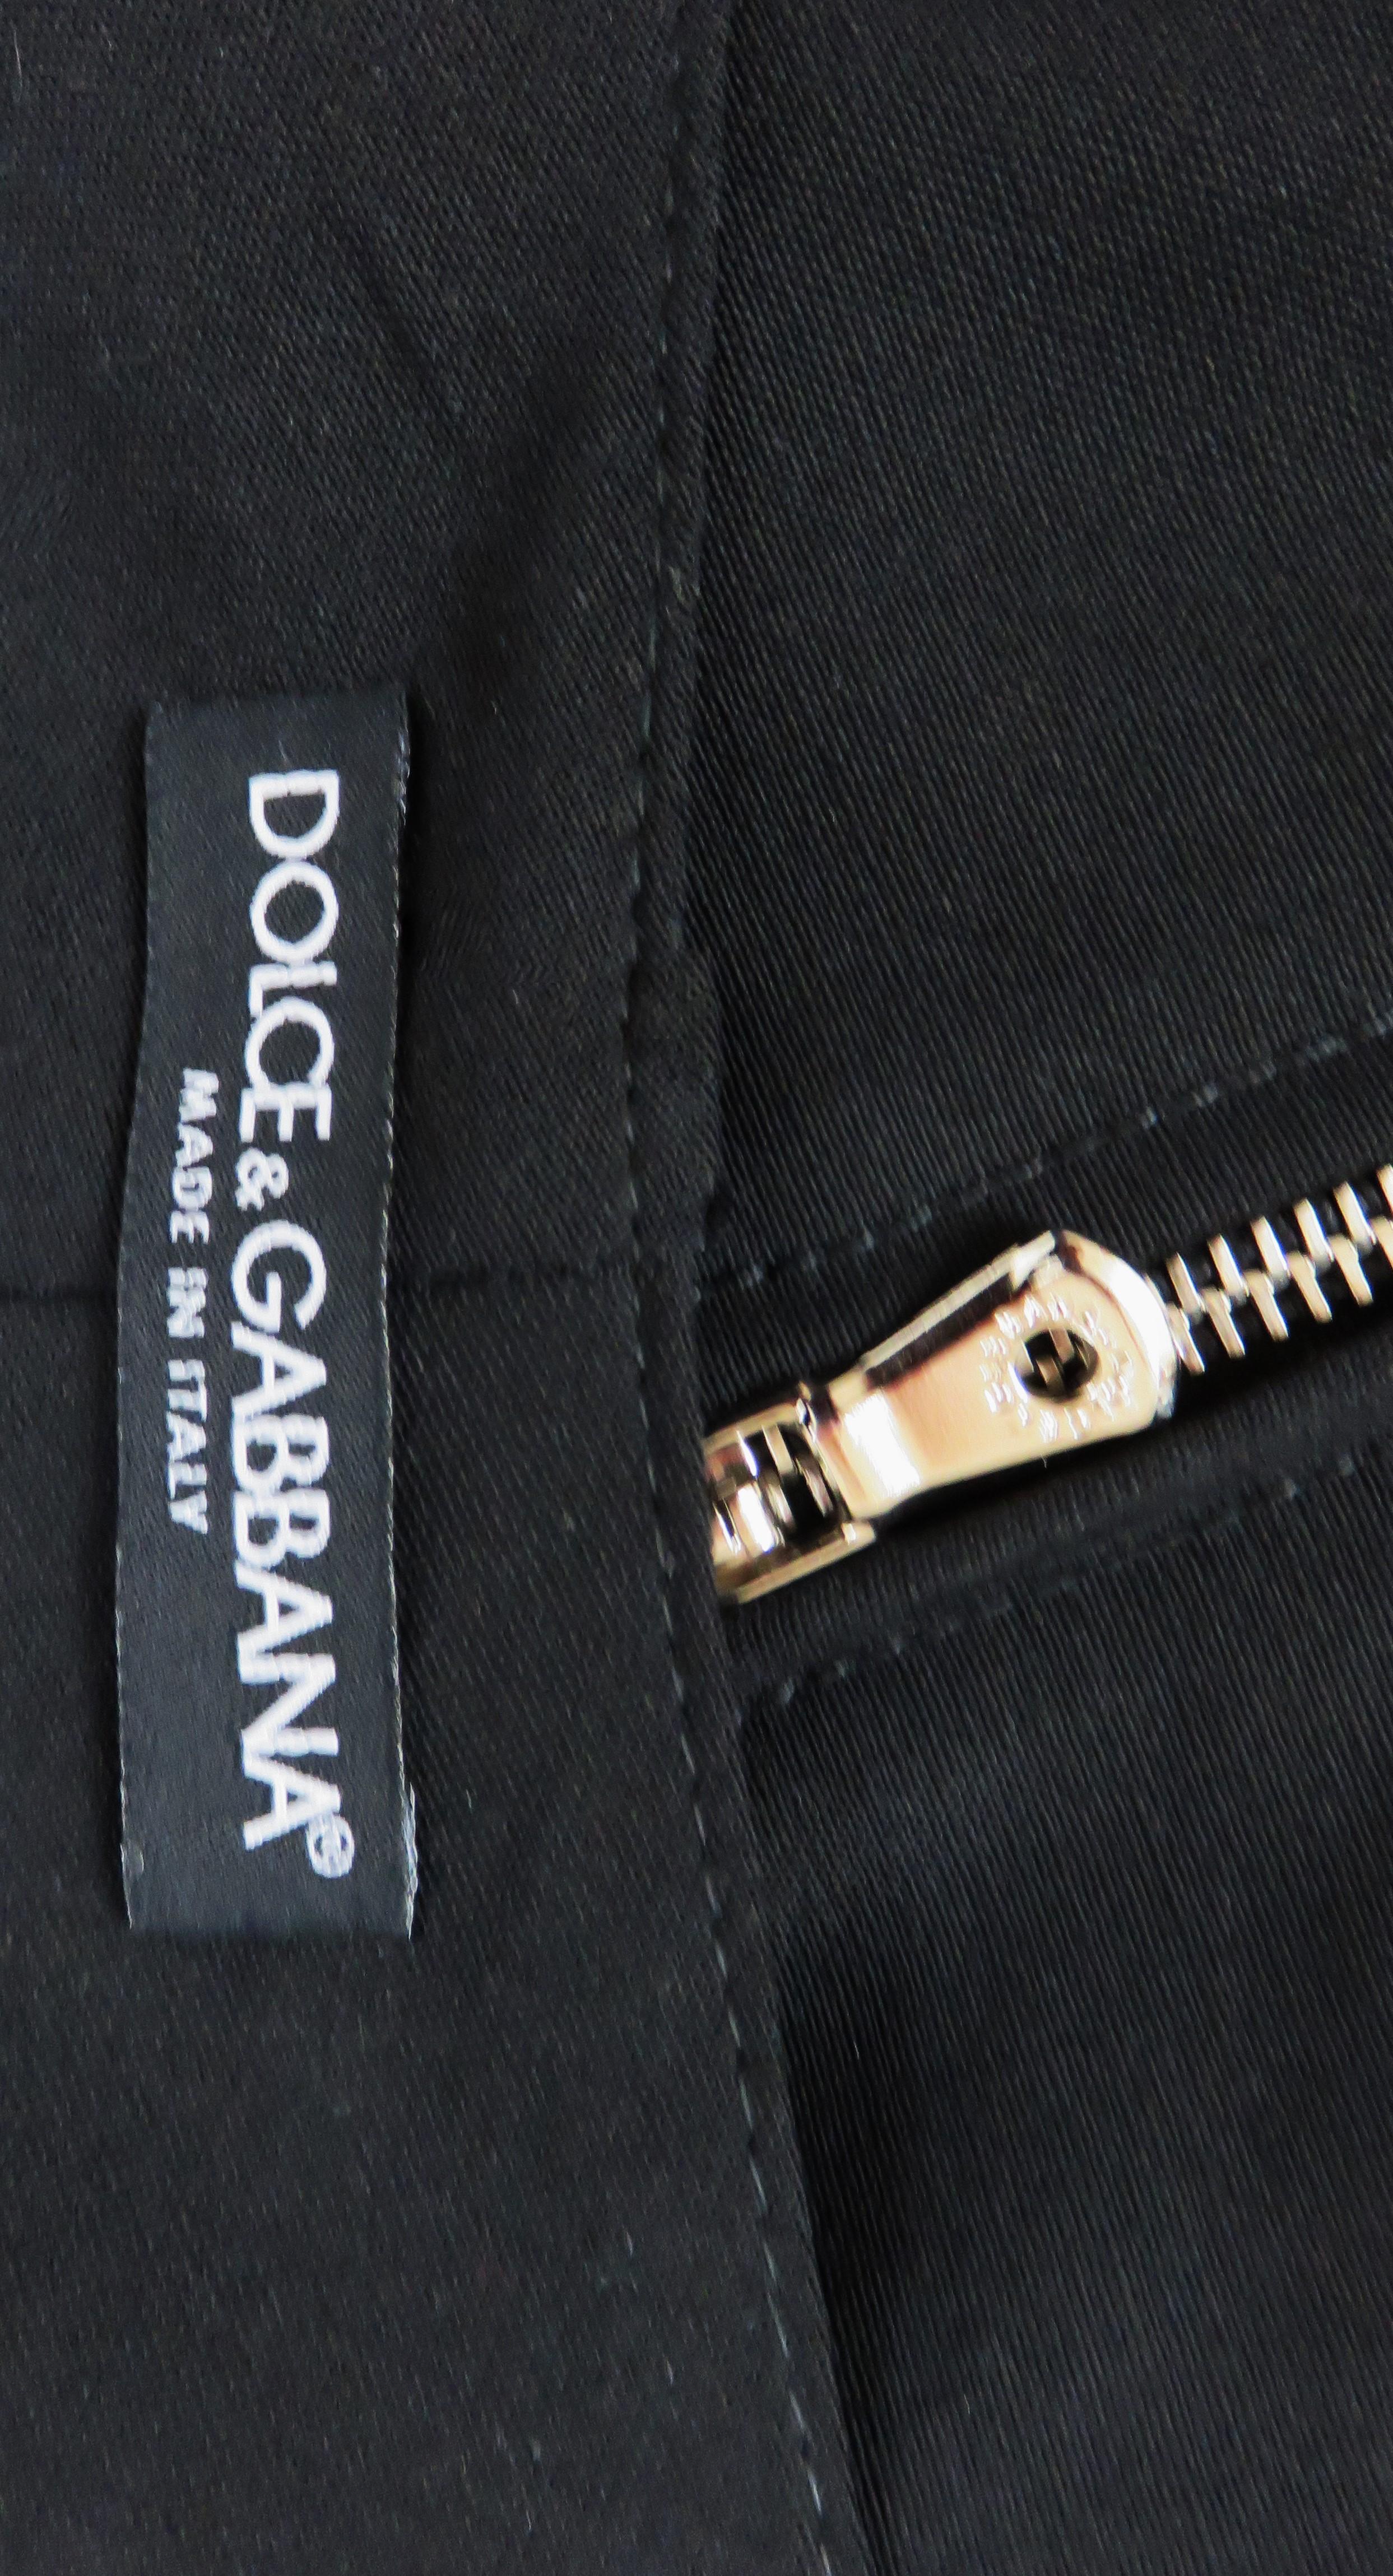 Dolce & Gabbana Pants with Straps and Zippers For Sale 7